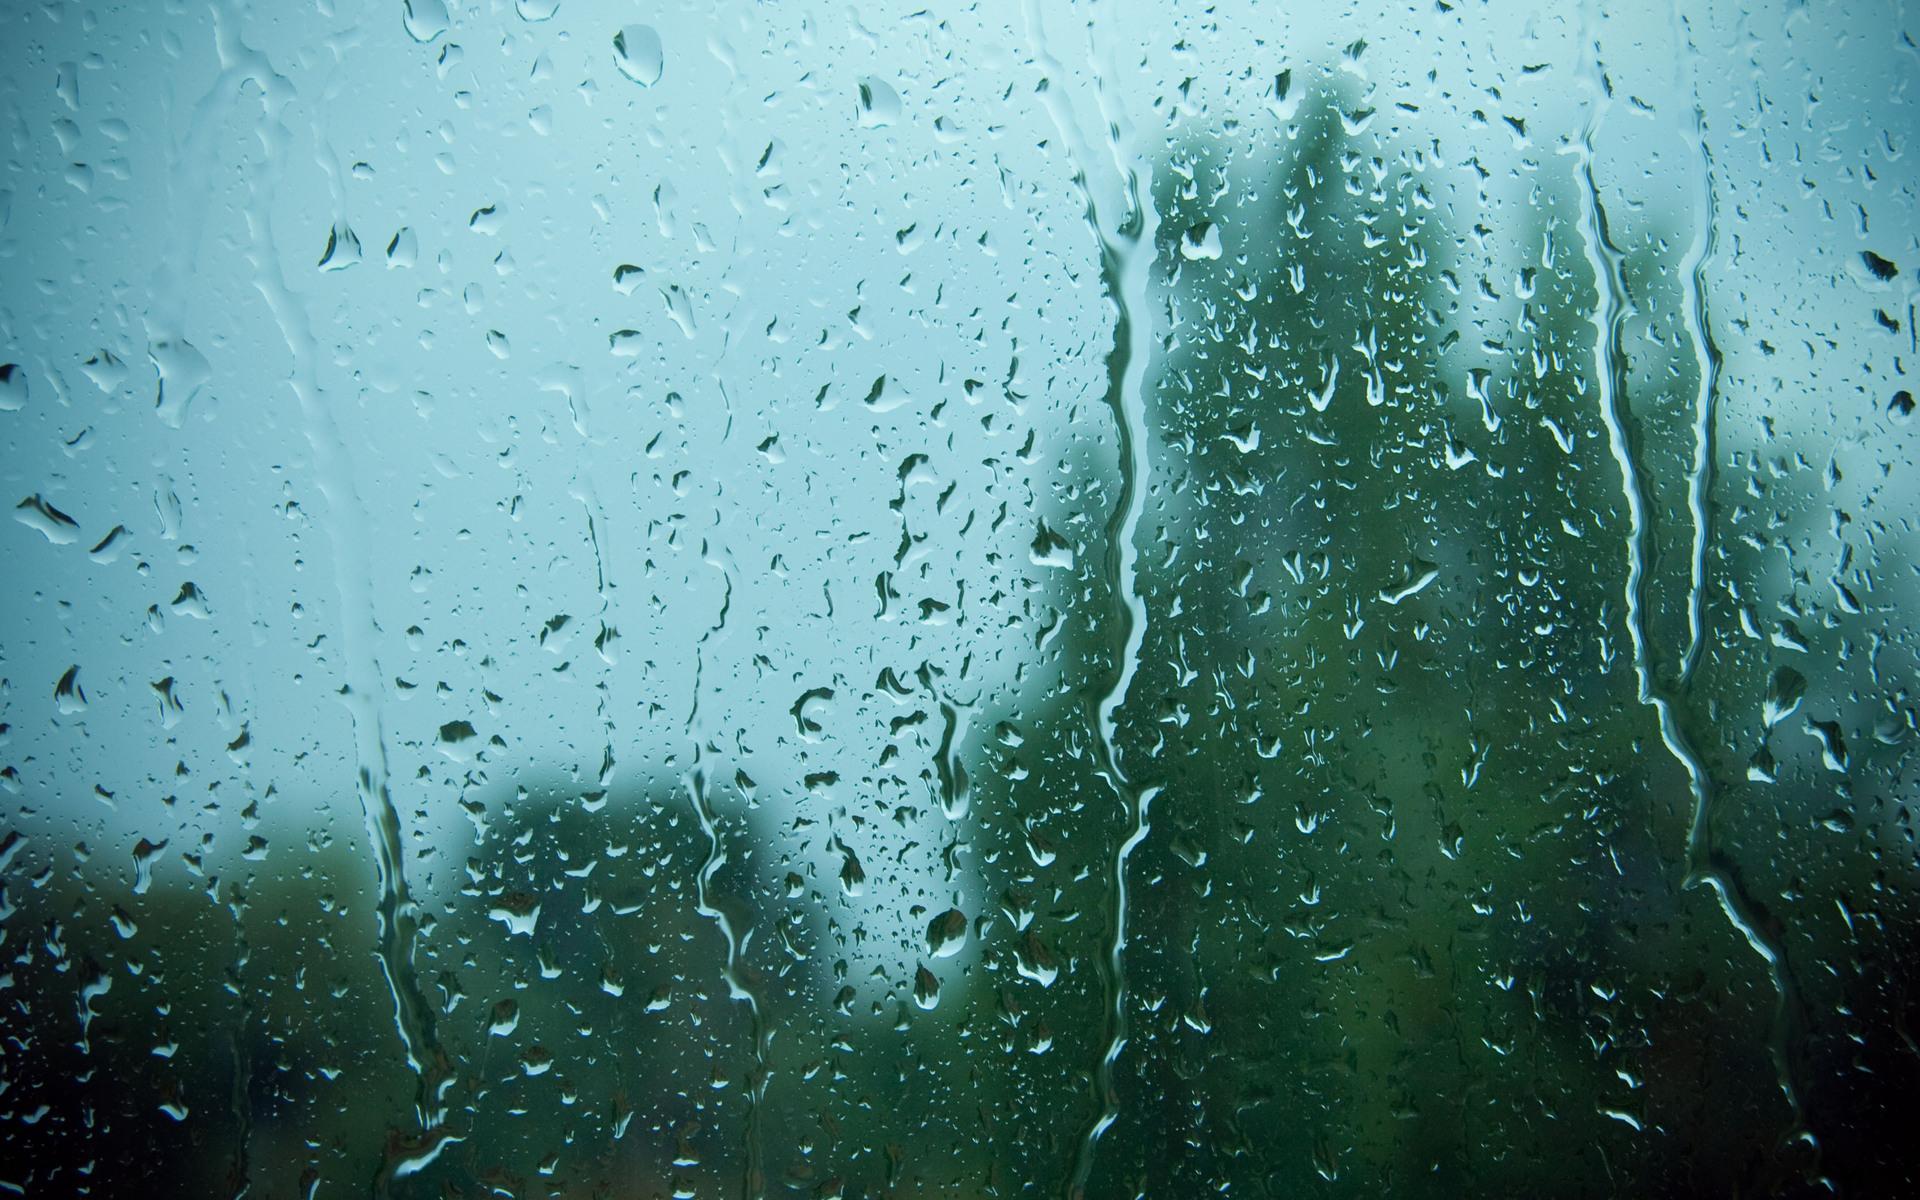 Download Rainy Glass Wallpaper, HD Backgrounds Download.